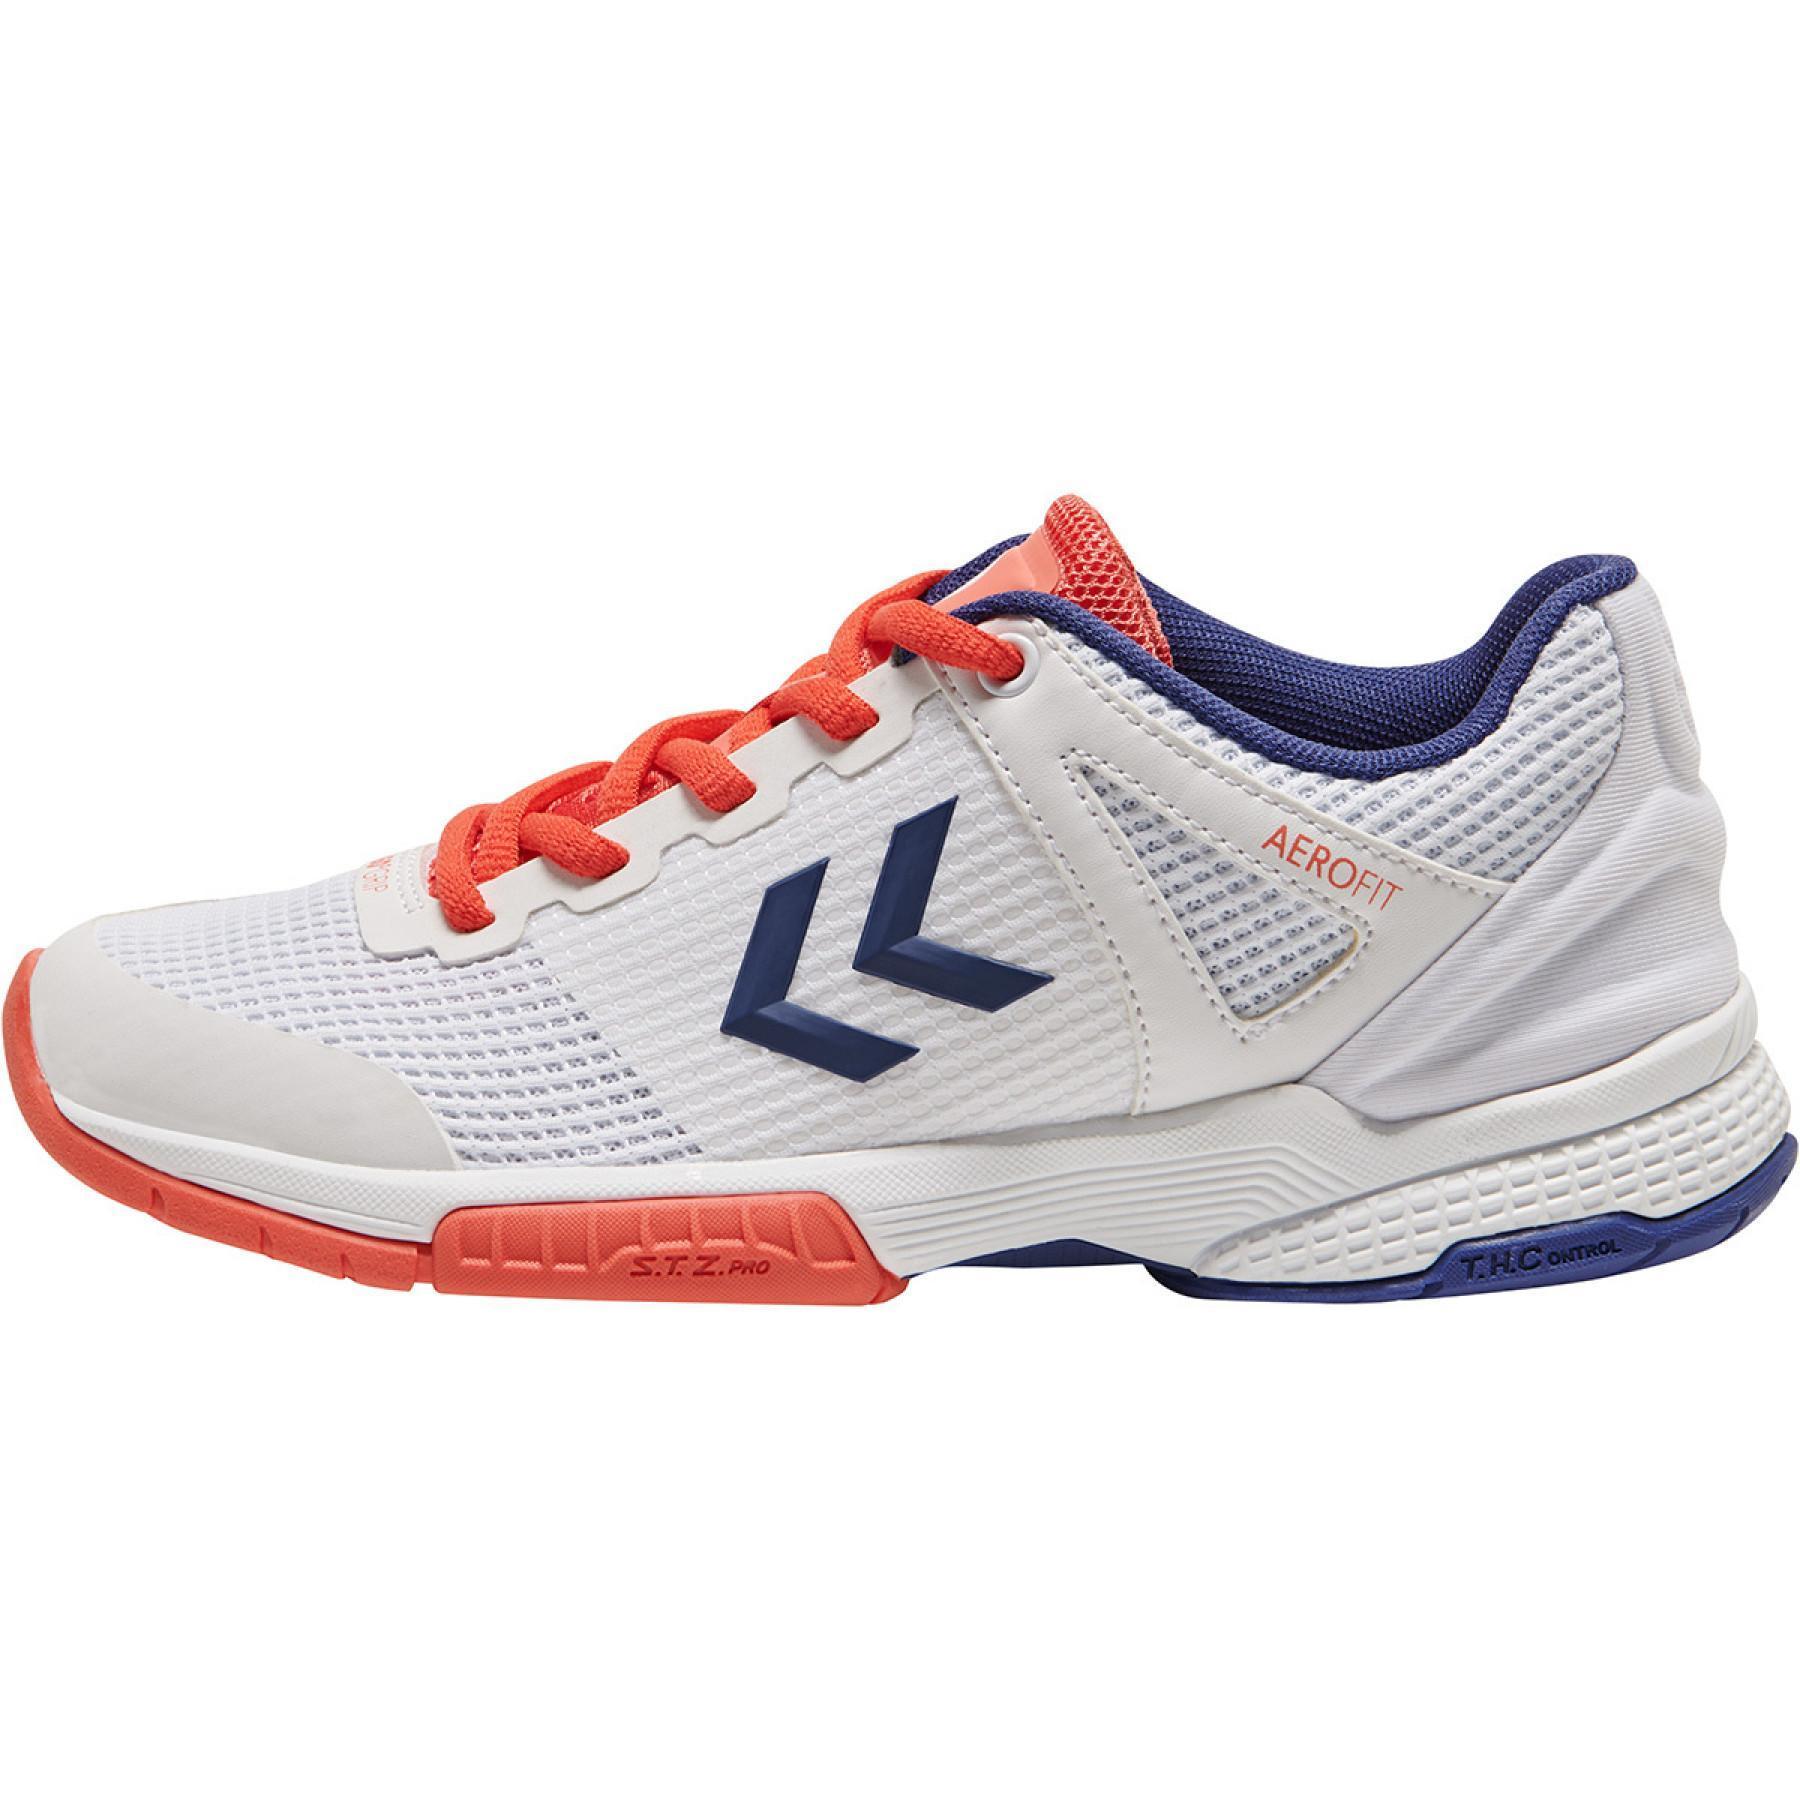 Zapatos de mujer Hummel aerocharge hb180 rely 3.0